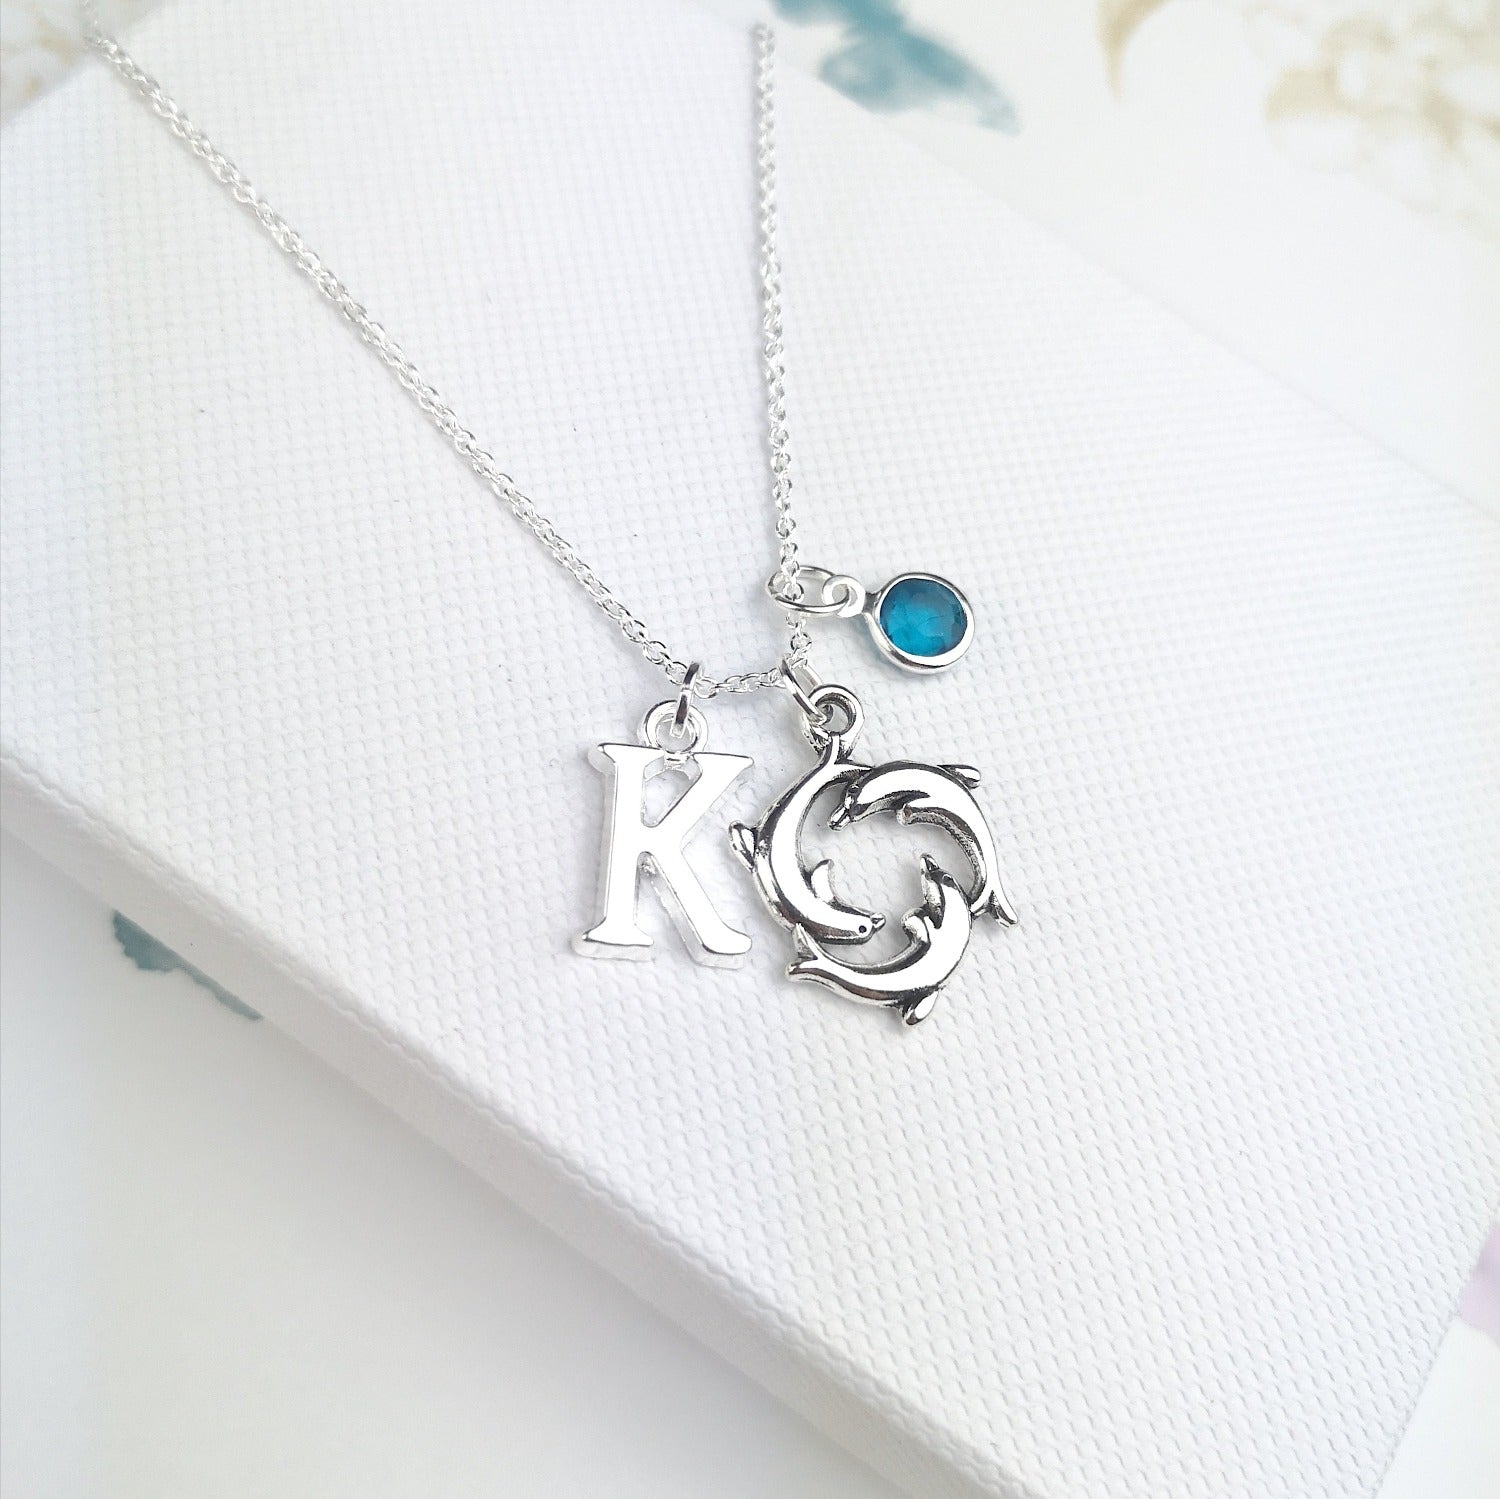 Personalised dolphin necklace with initial and birthstone